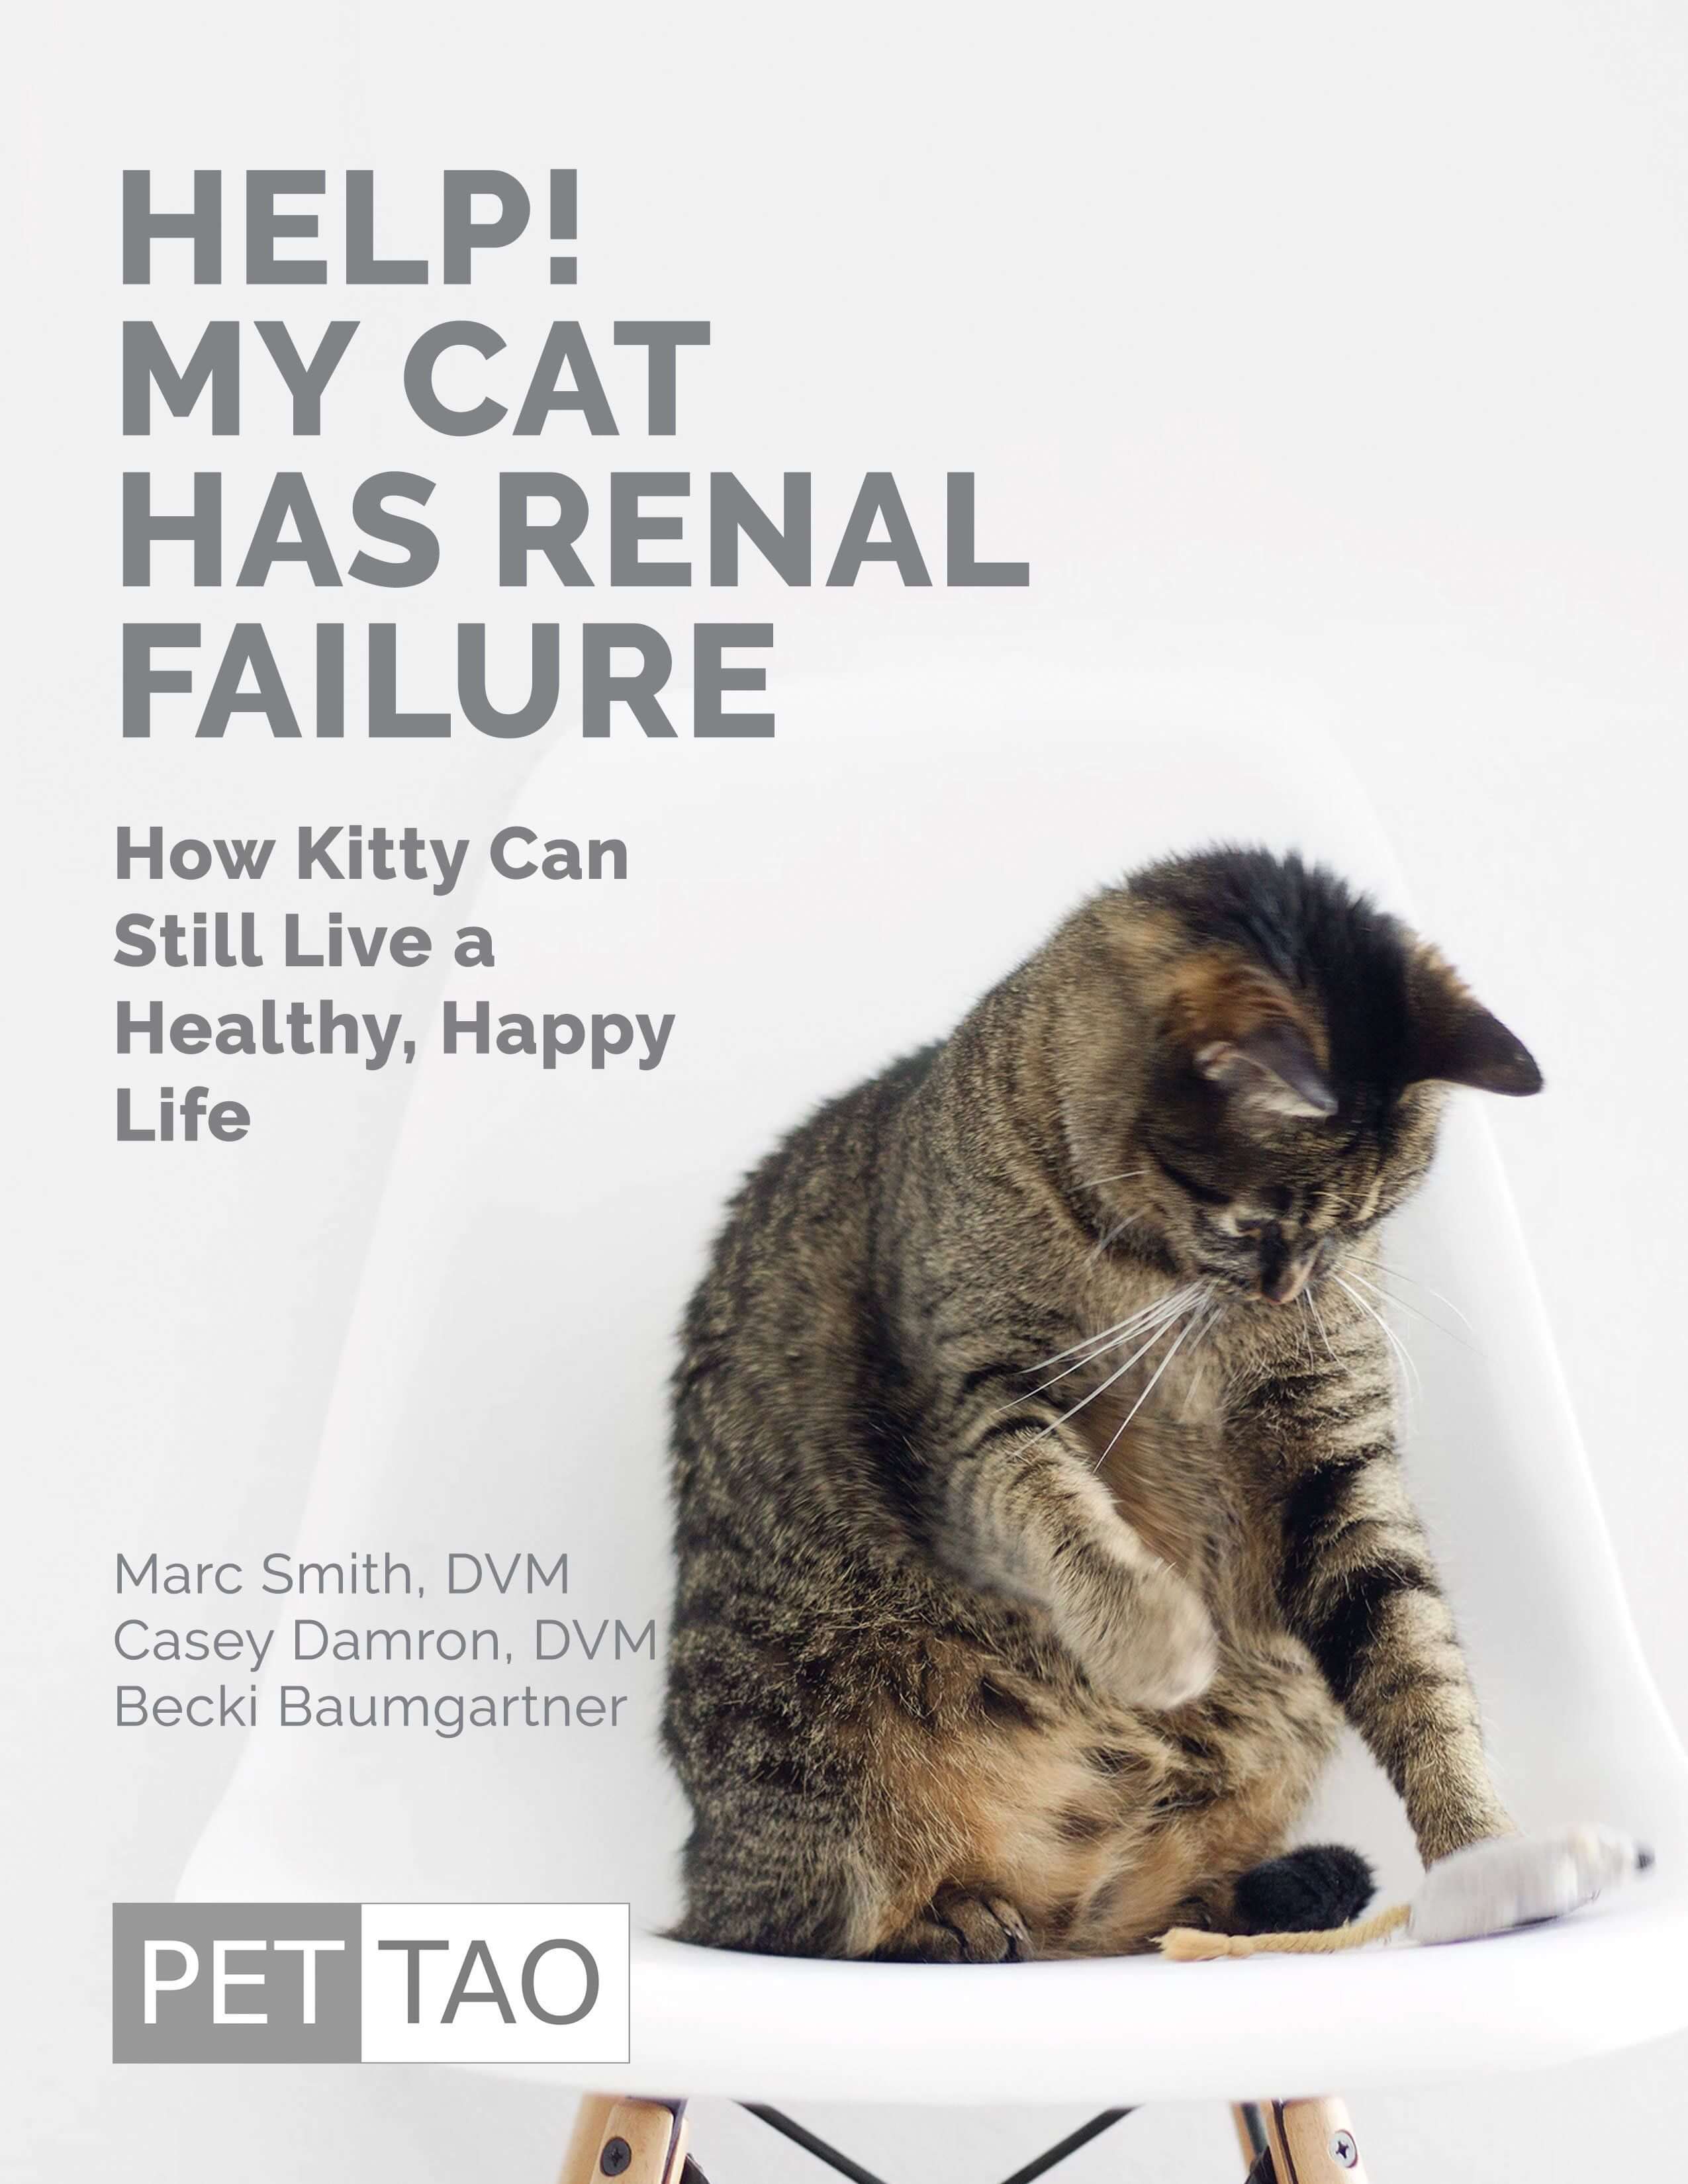 Help! My Cat Has Renal Failure: How Kitty Can Still Live A Healthy Happy Life